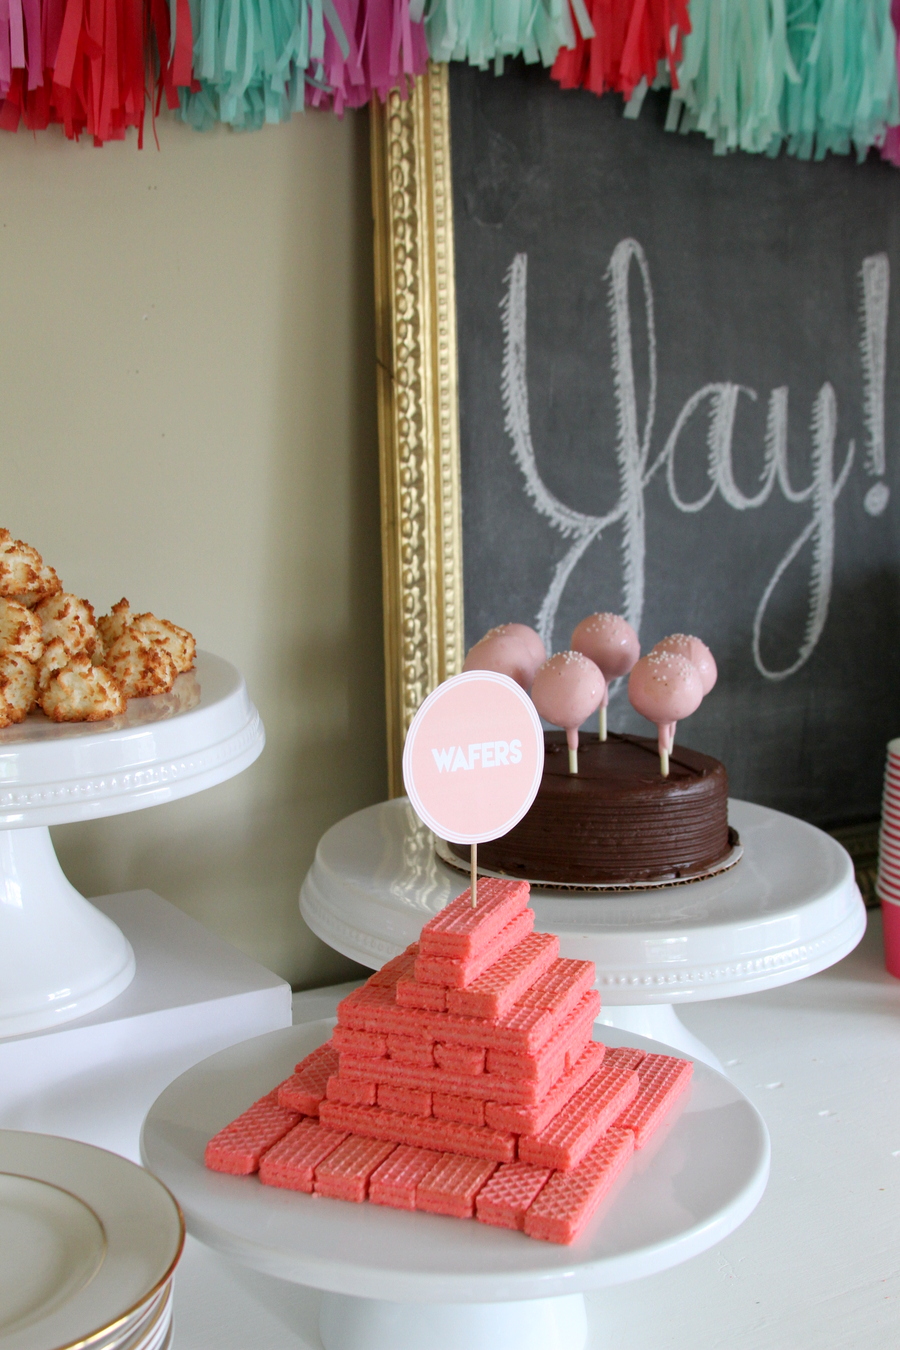 how to put together the easiest ever baby shower (aka the "2 hour shower")